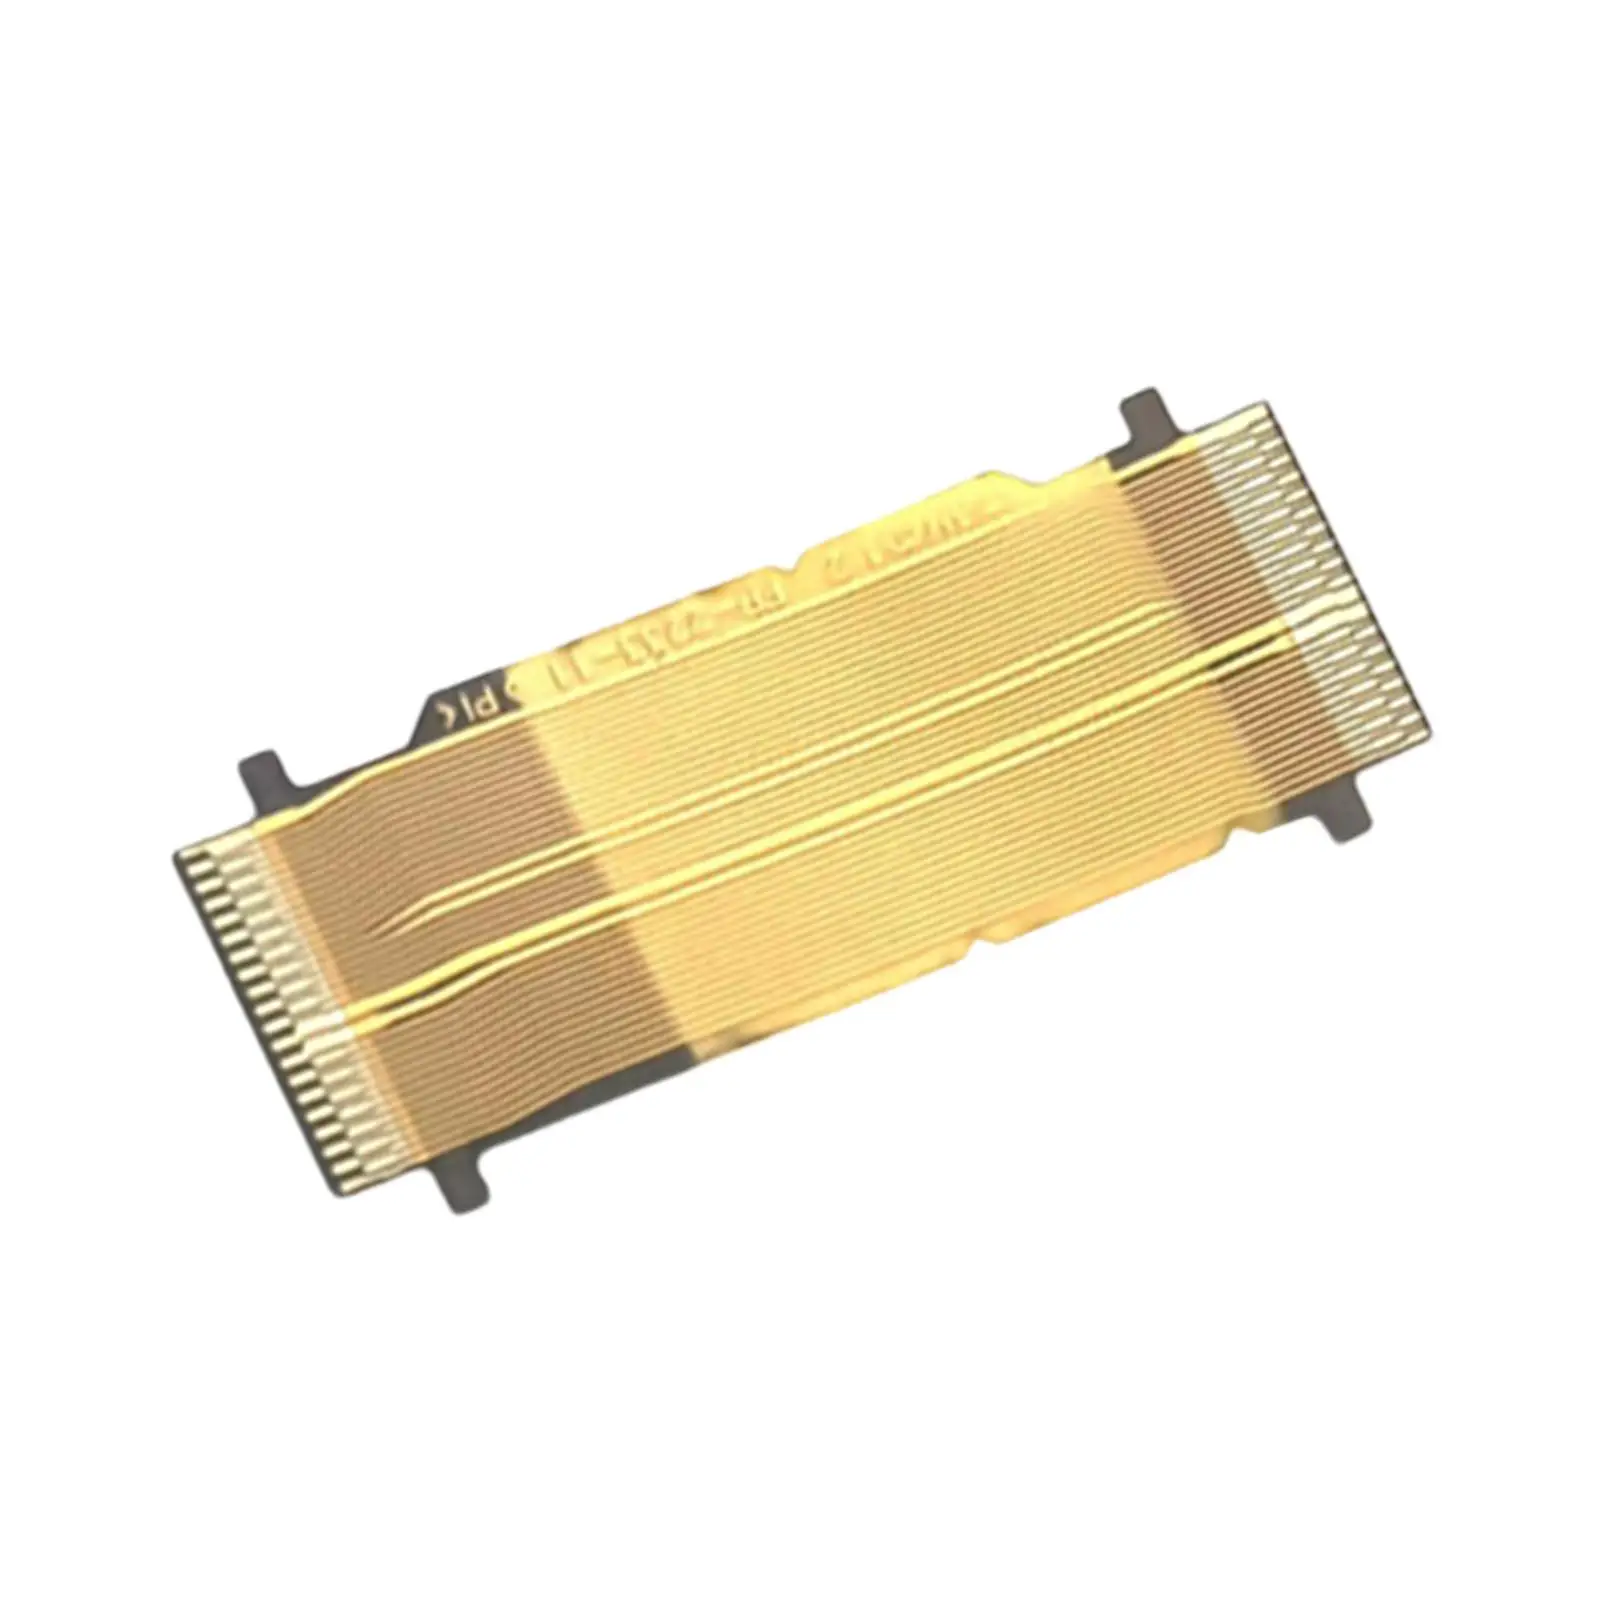 Motherboard Mainboard Connector Flex Cable Fpc Flashing Interface Board Flex Cable for Dsc RX100M3 Fittings Direct Replaces